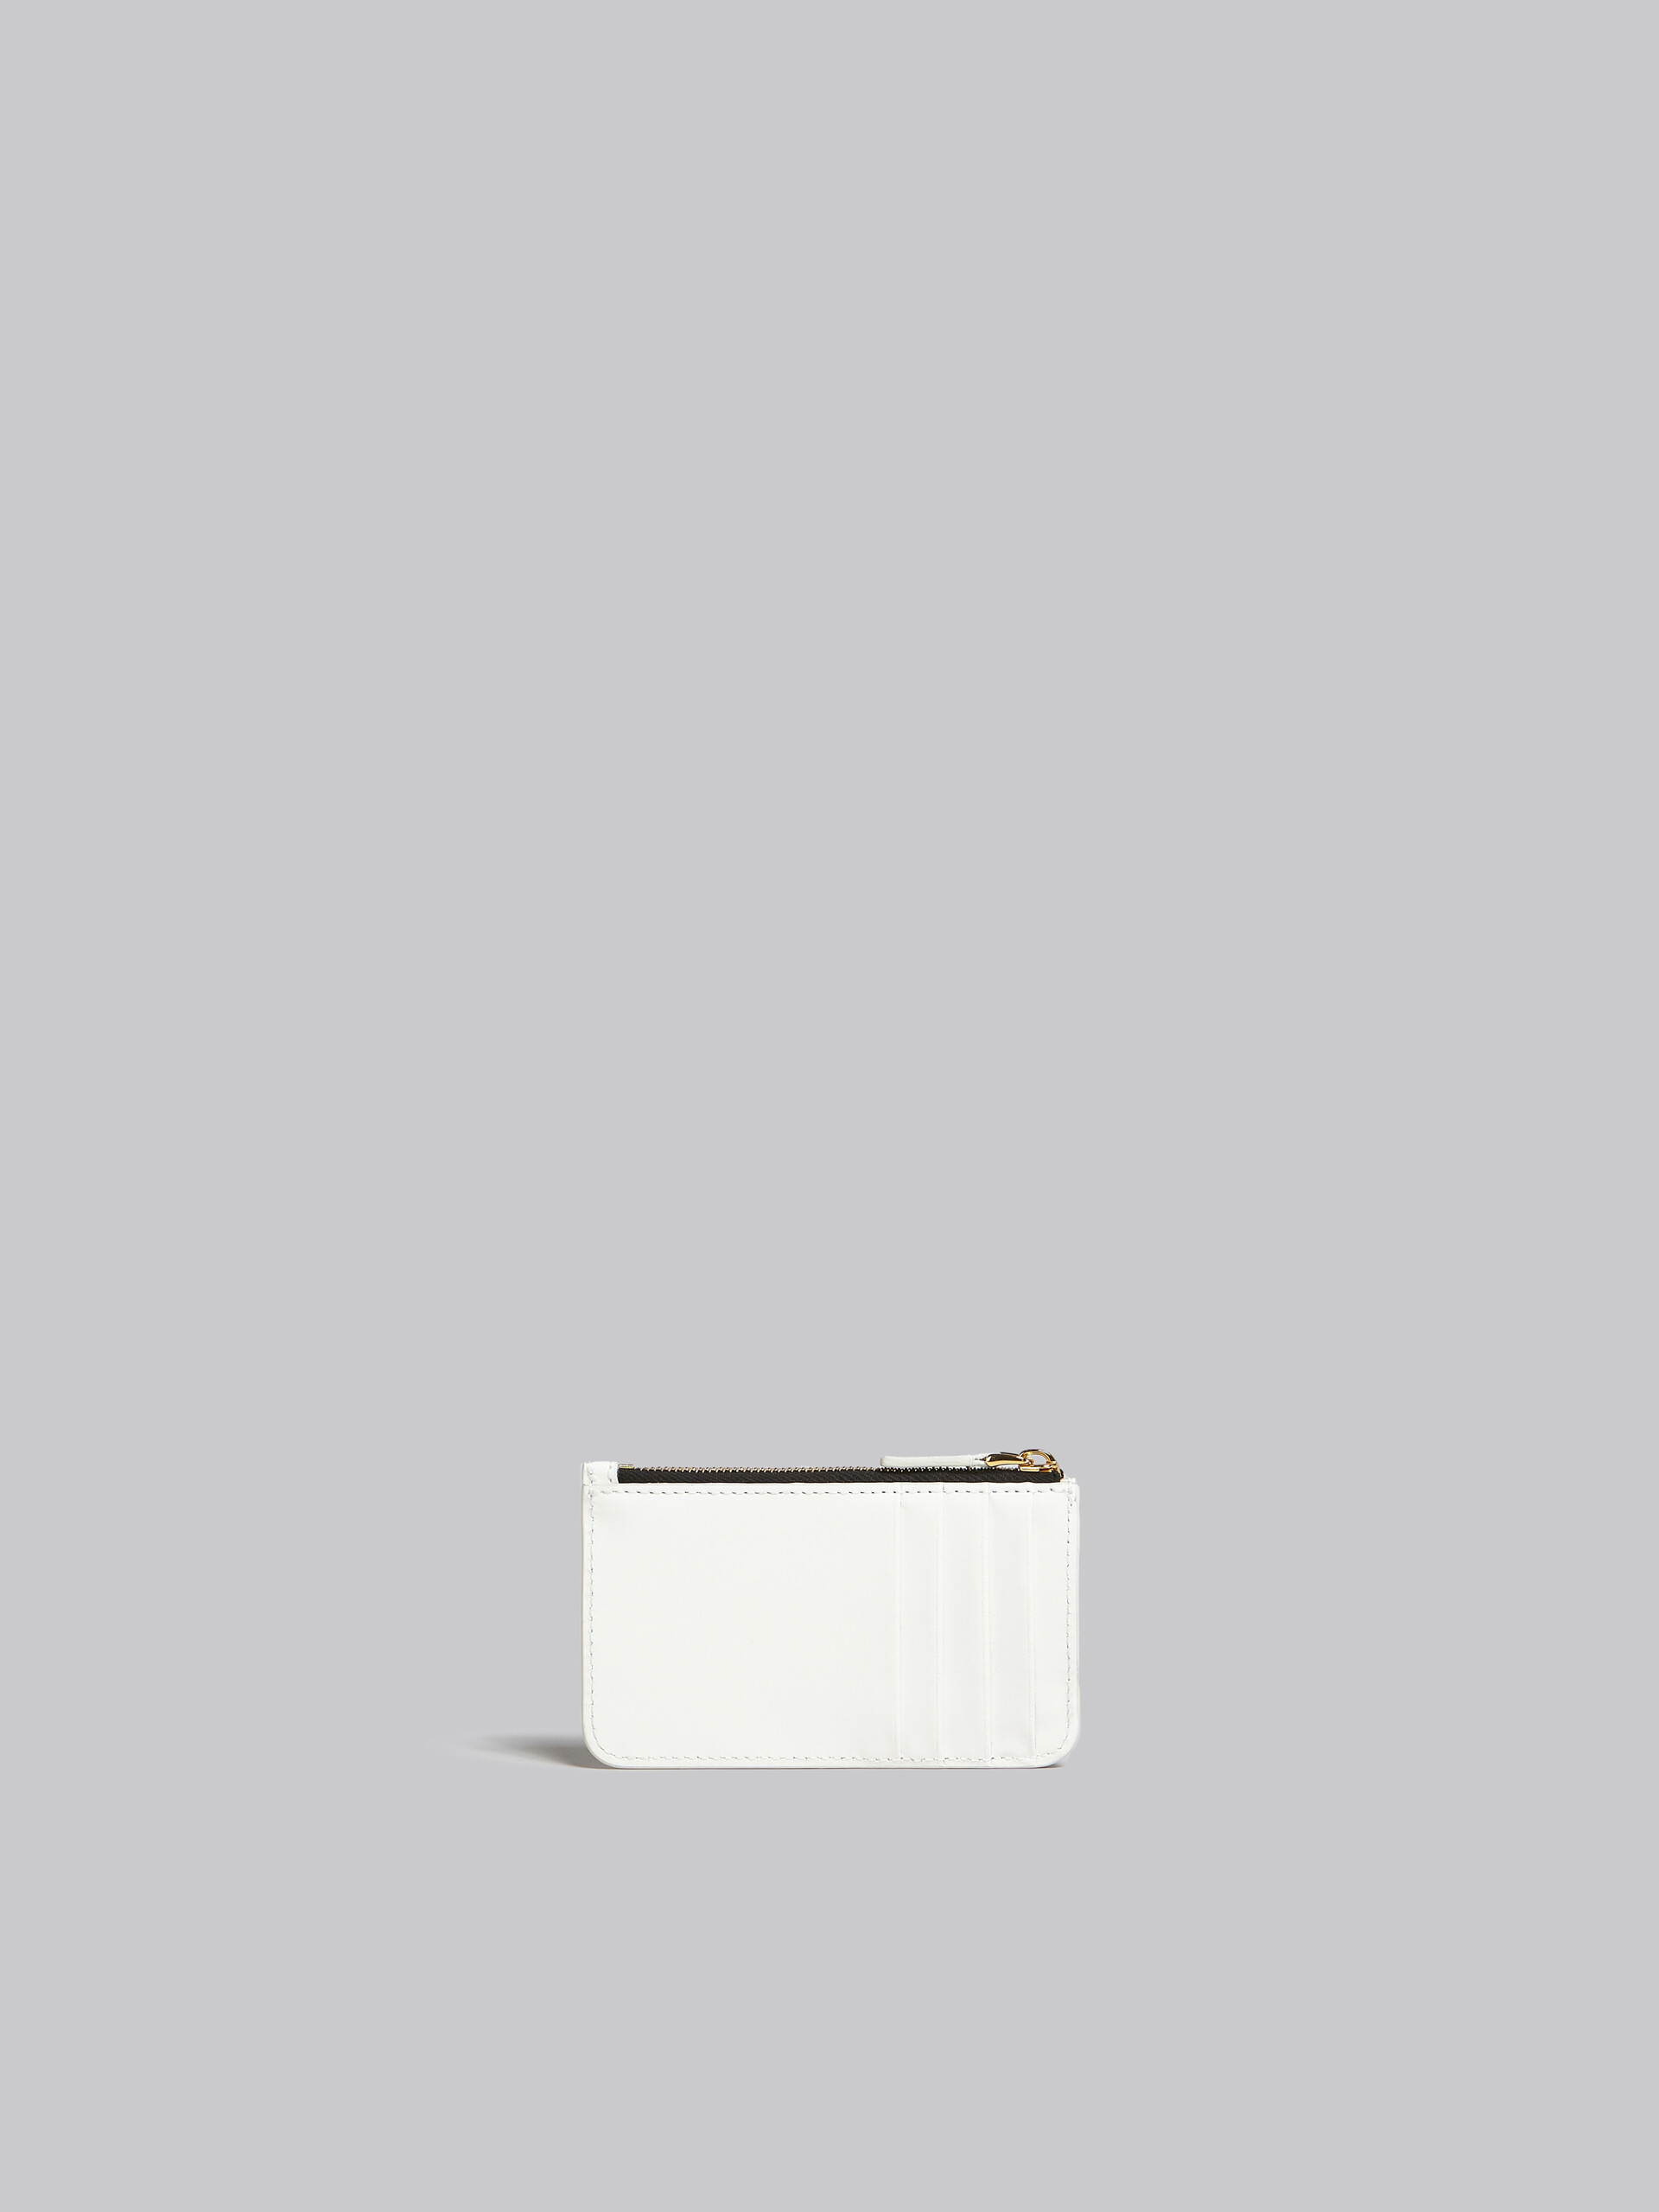 White and silver leather card holder - Wallets - Image 3